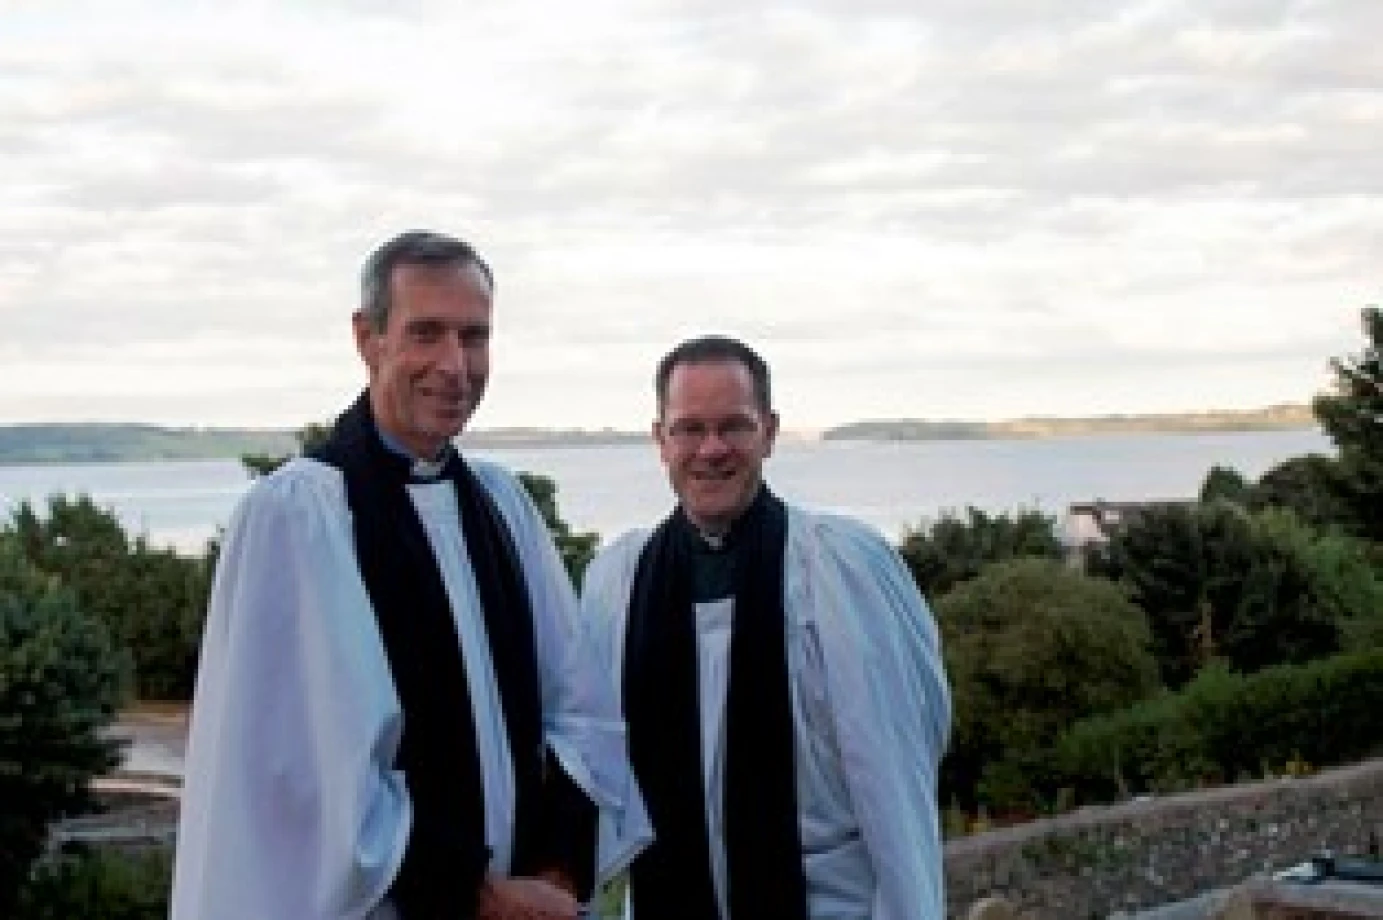 New rector of Killyleagh follows in the family footsteps